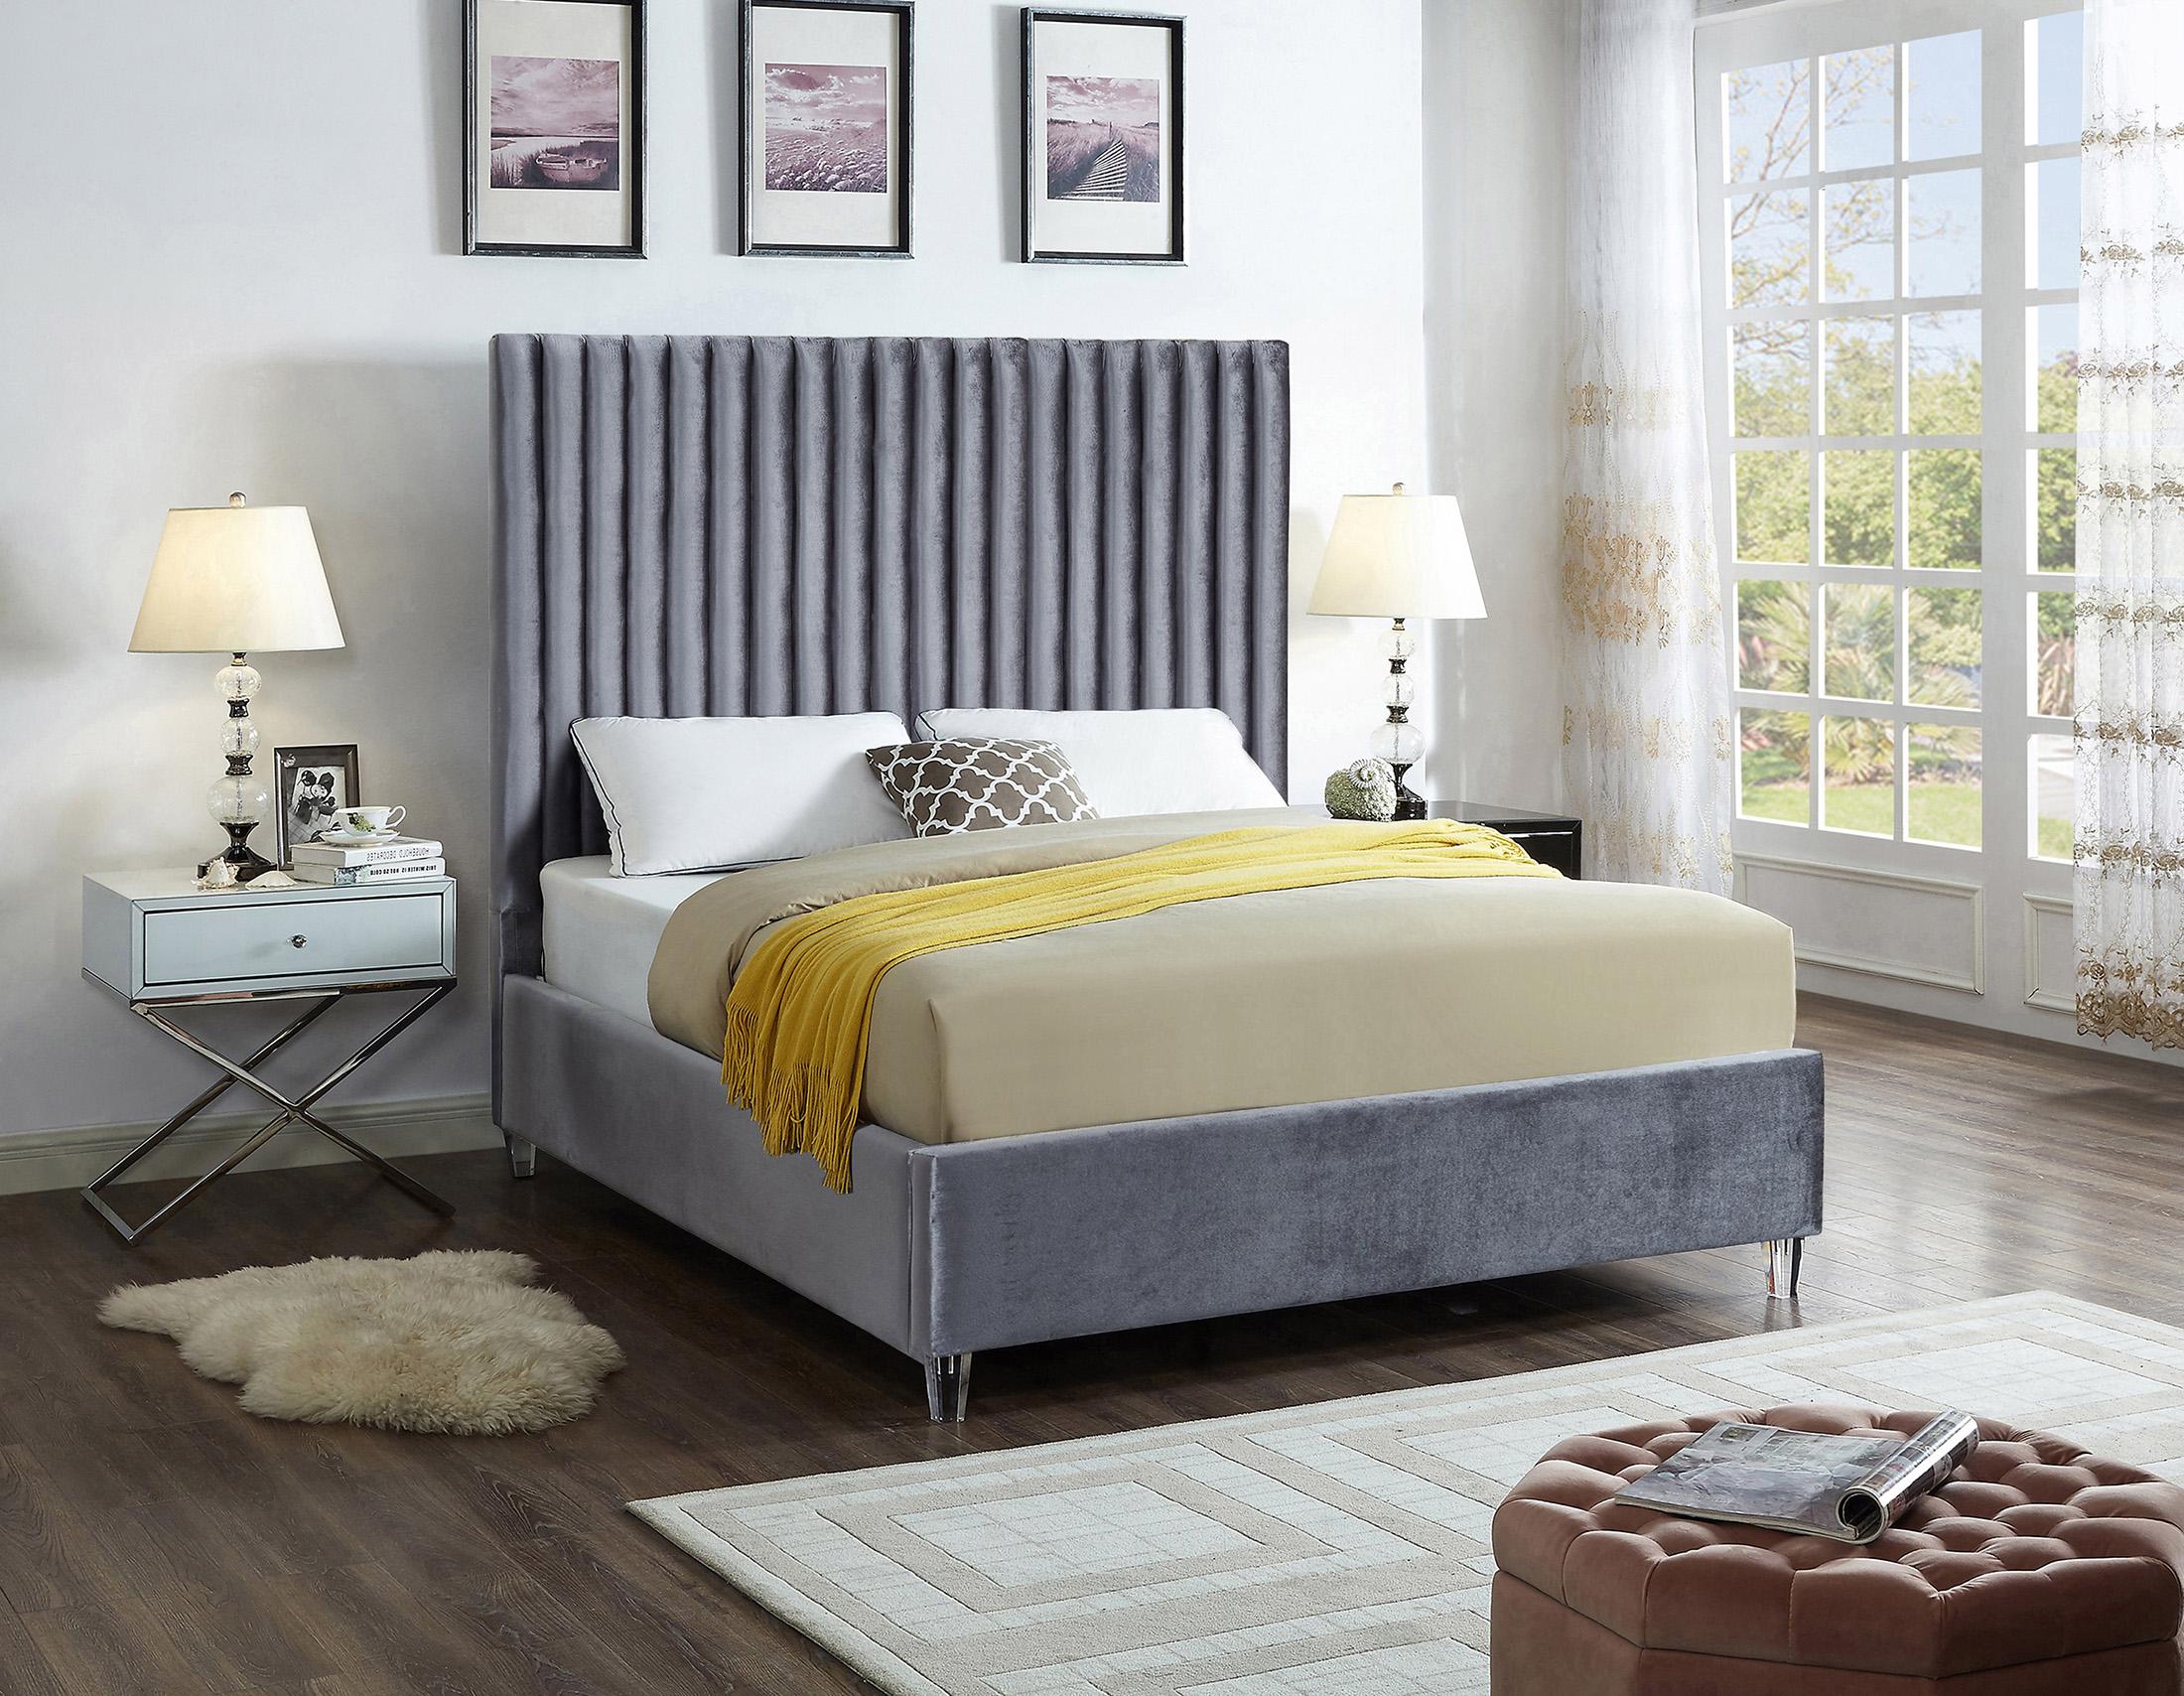 

    
GREY Velvet Channel Tufted Platform Queen Bed Candace Meridian Contemporary
